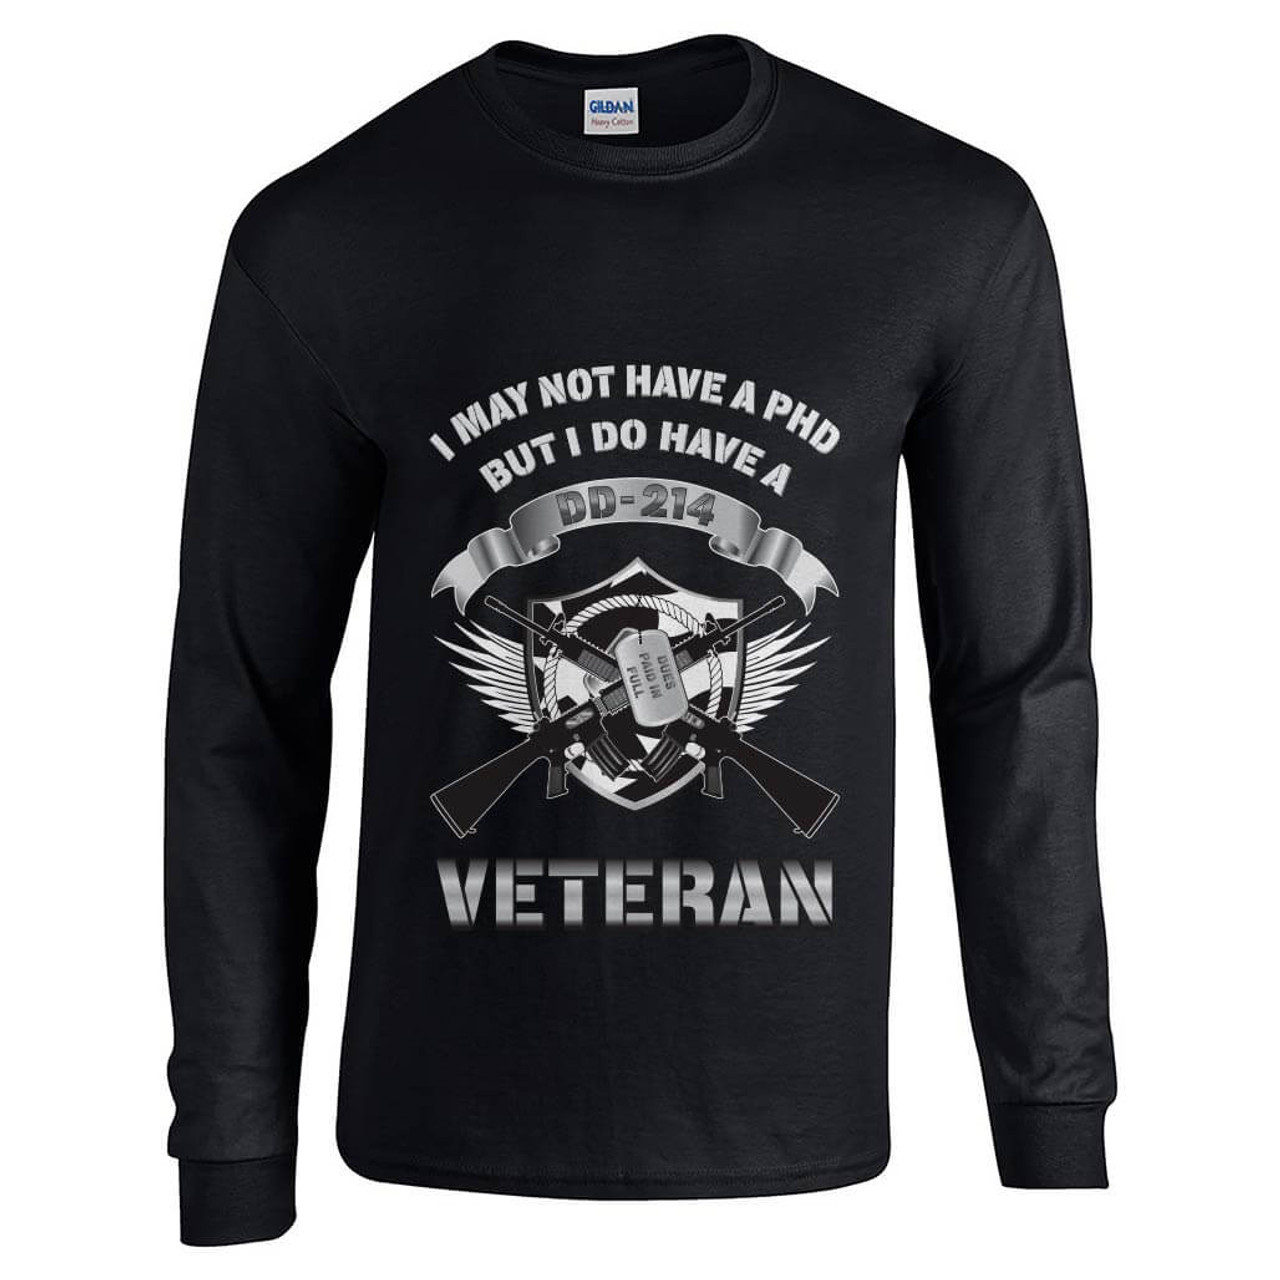 US Veteran Long Sleeve T-Shirt with DD-214 long sleeve with fun image army, navy us air force marines